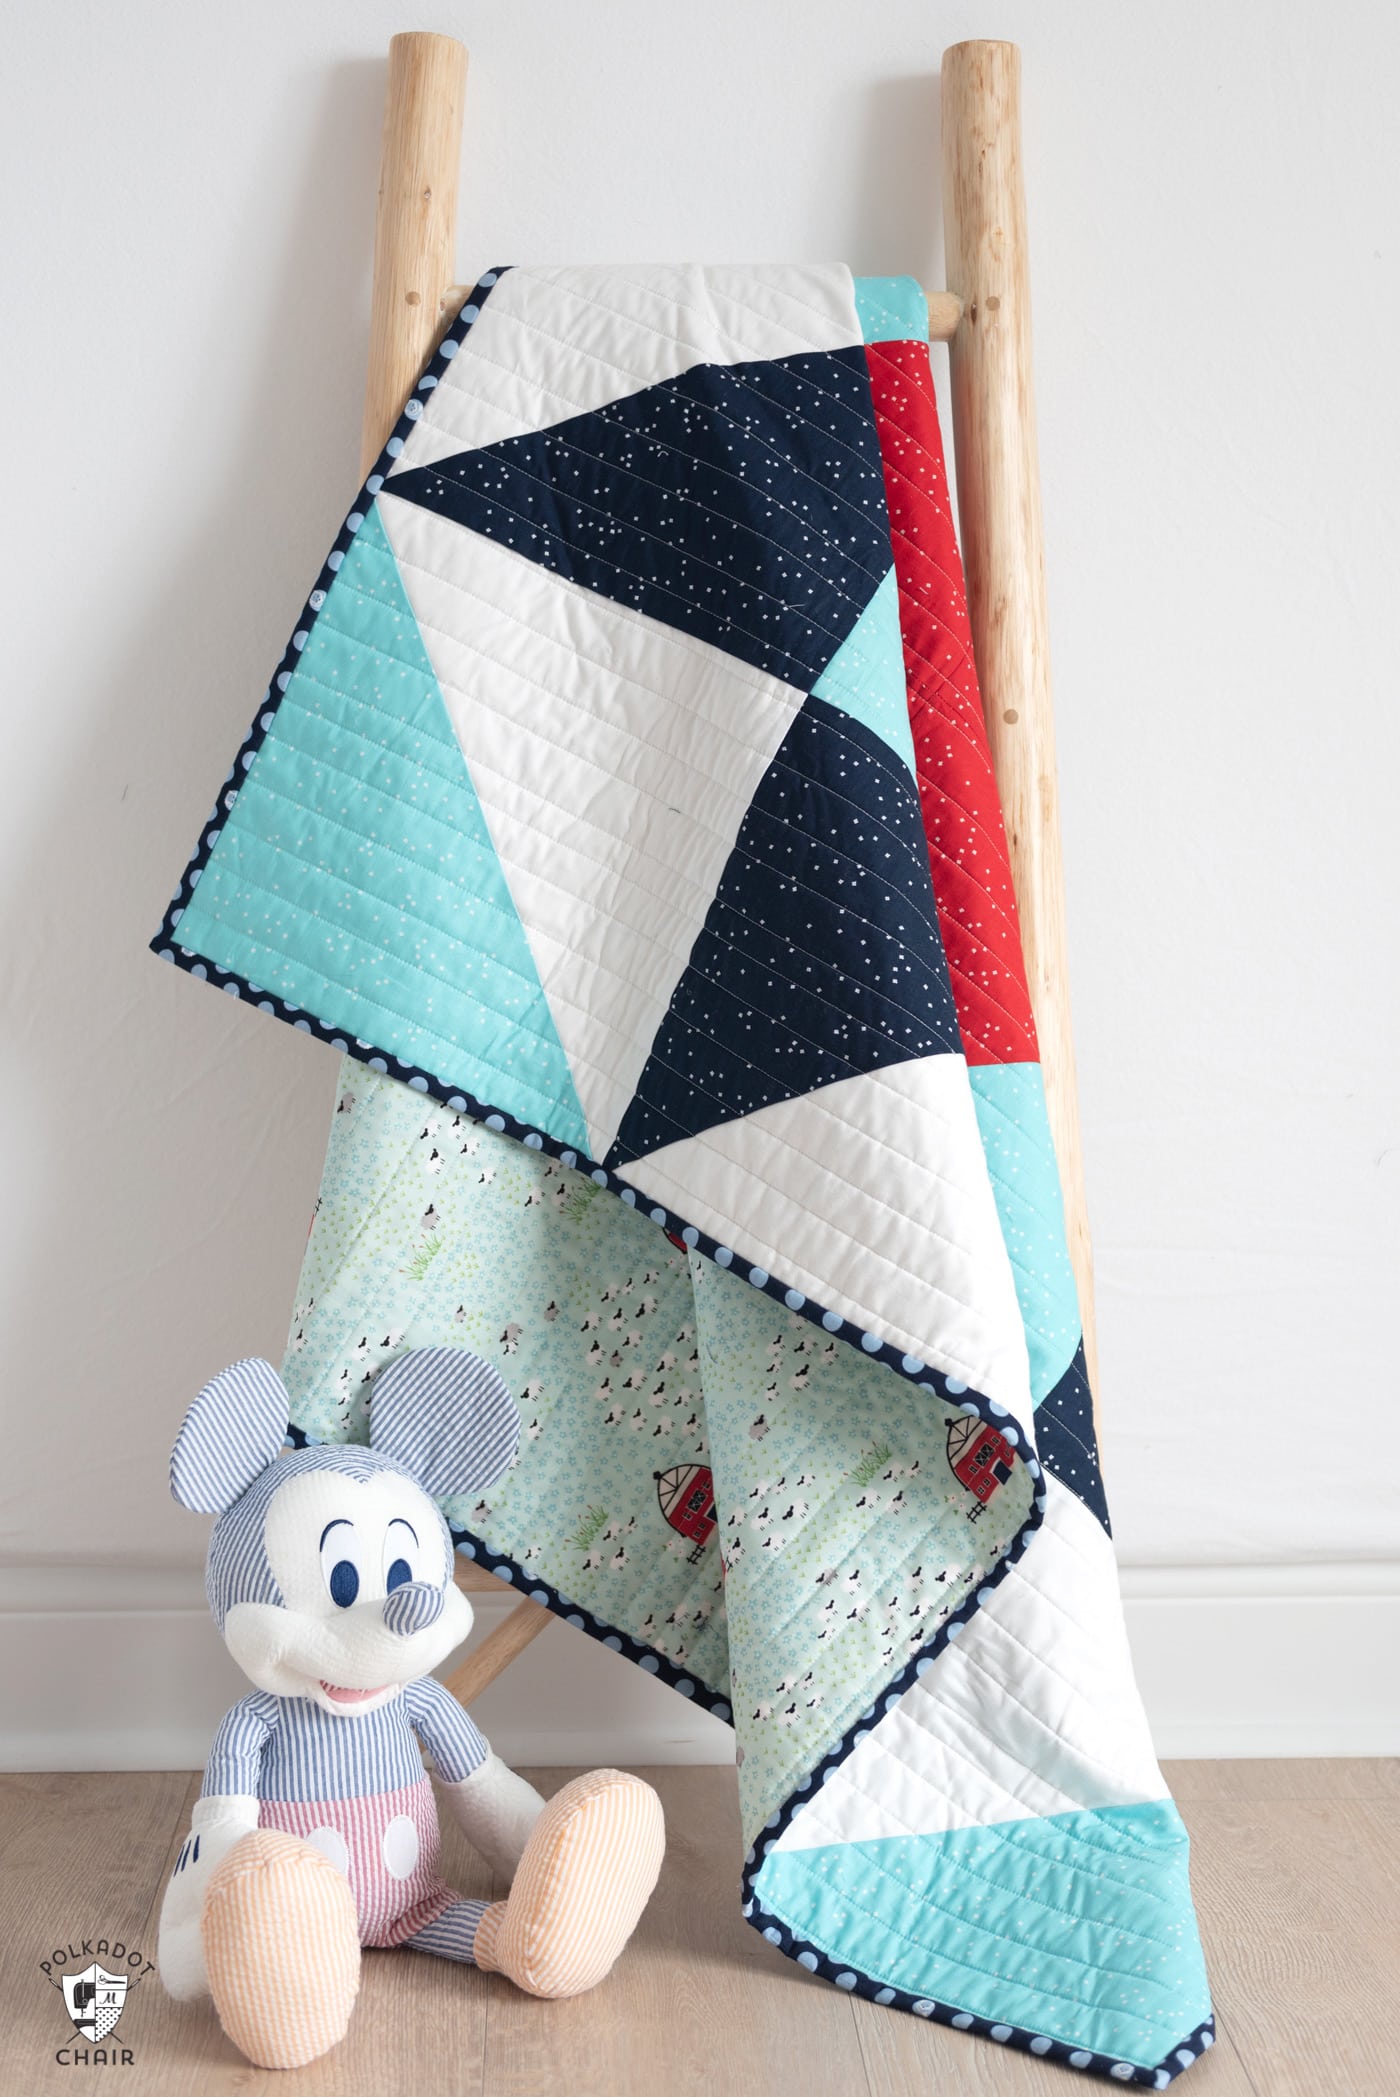 Modern Baby Quilts [Book]